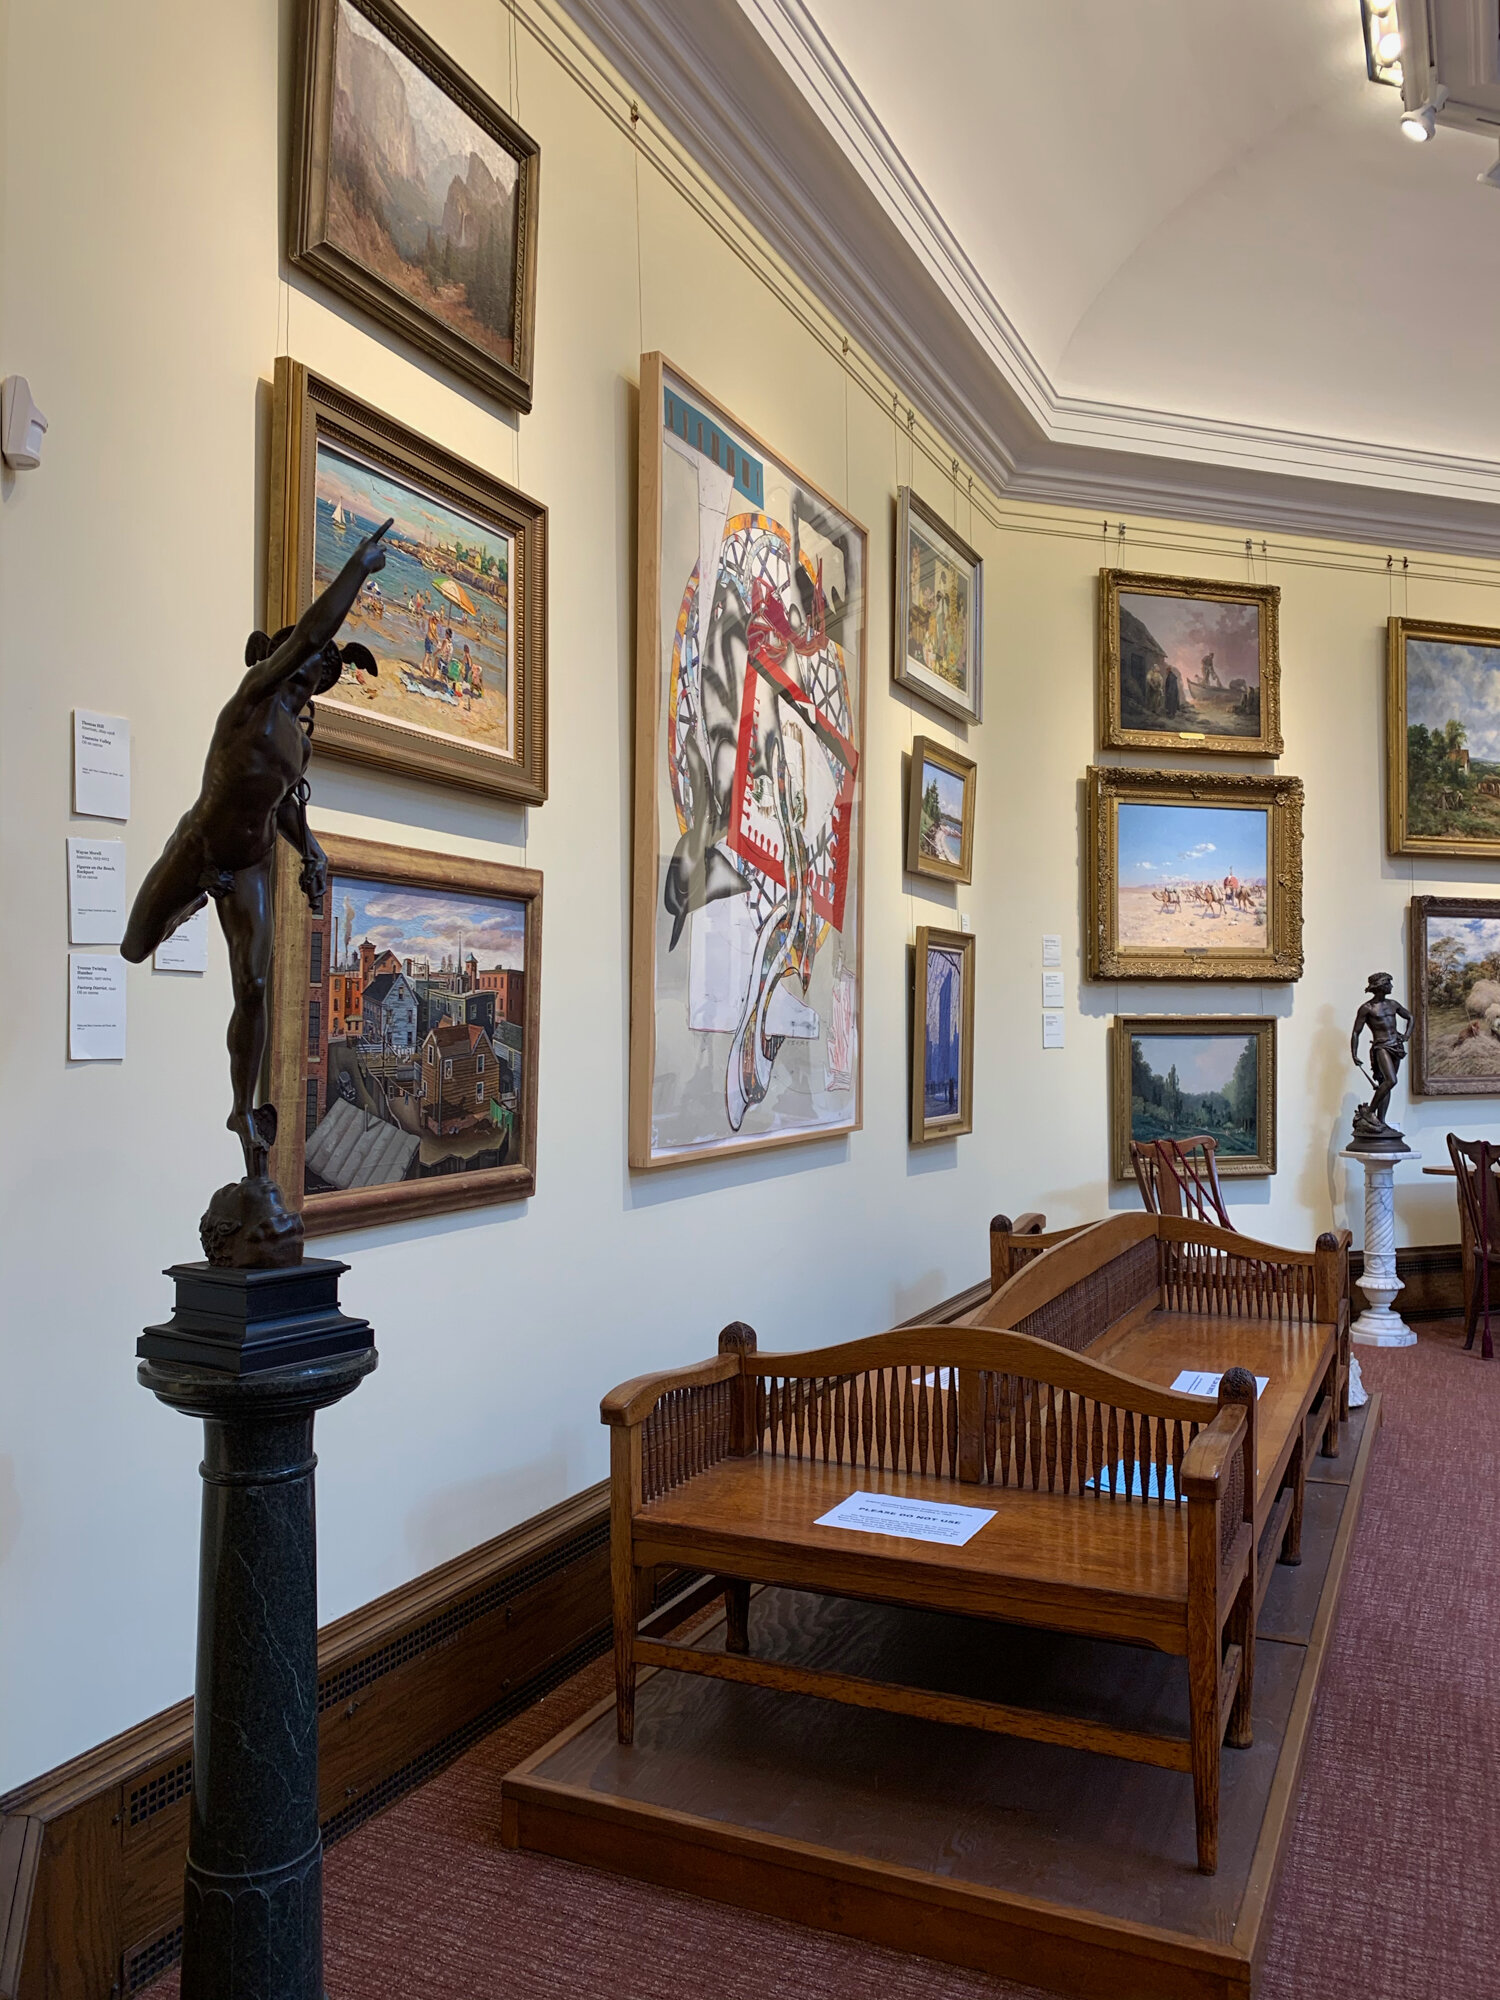 Artworks in the collection of the Converse Memorial Building, Malden, MA